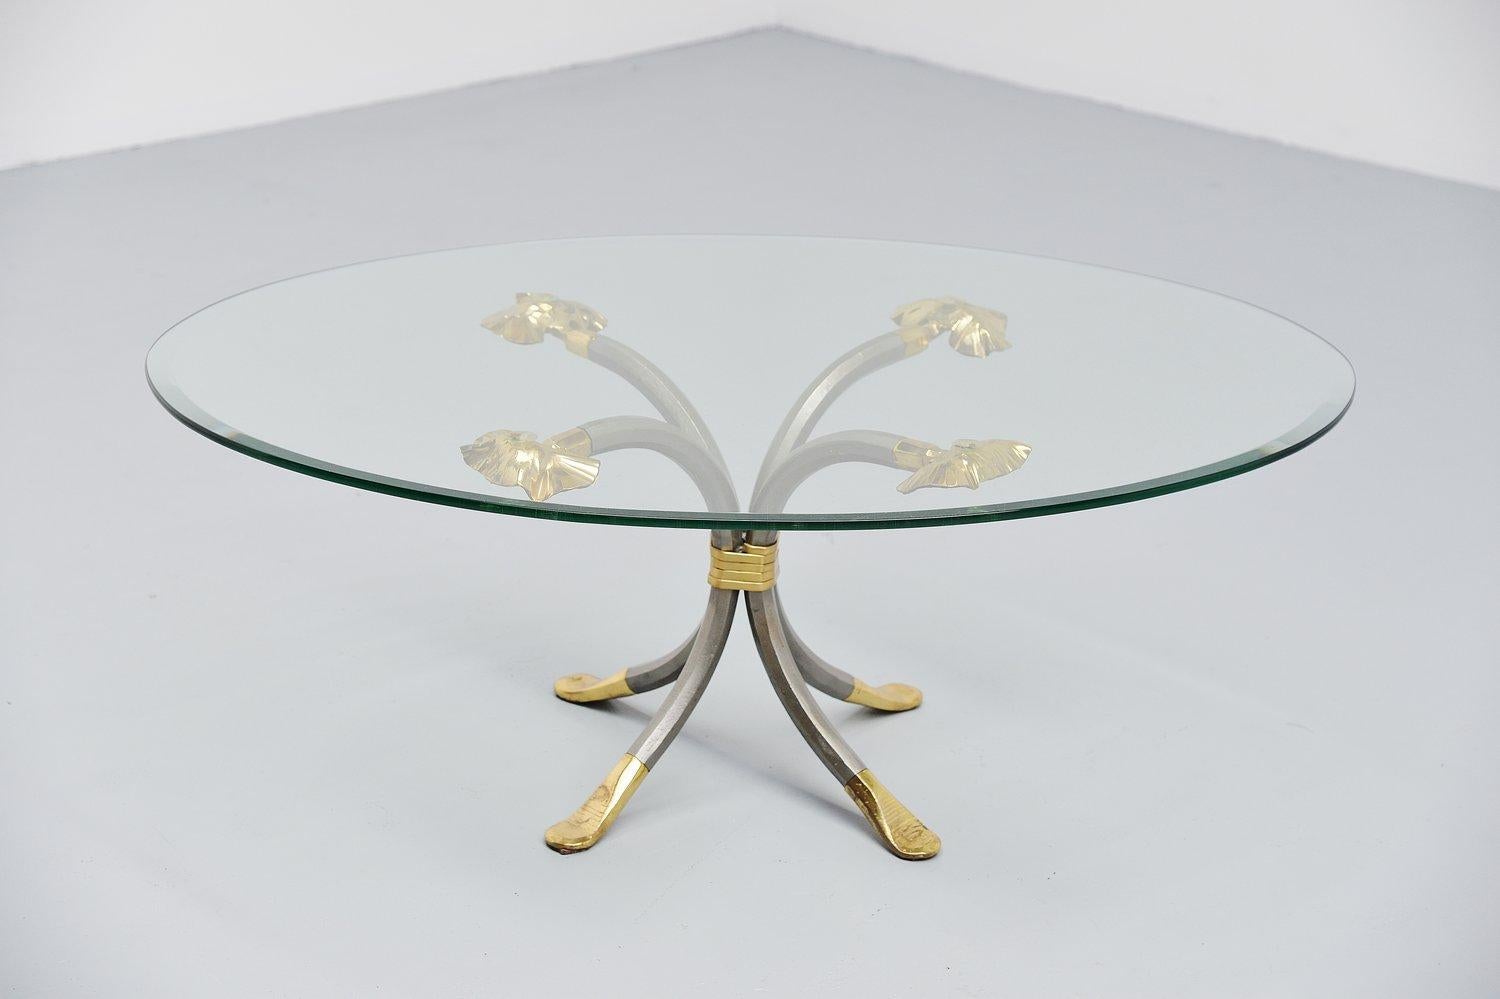 Hollywood Regency Manfred Bredohl Brass and Iron Coffee Table, Germany, 1970